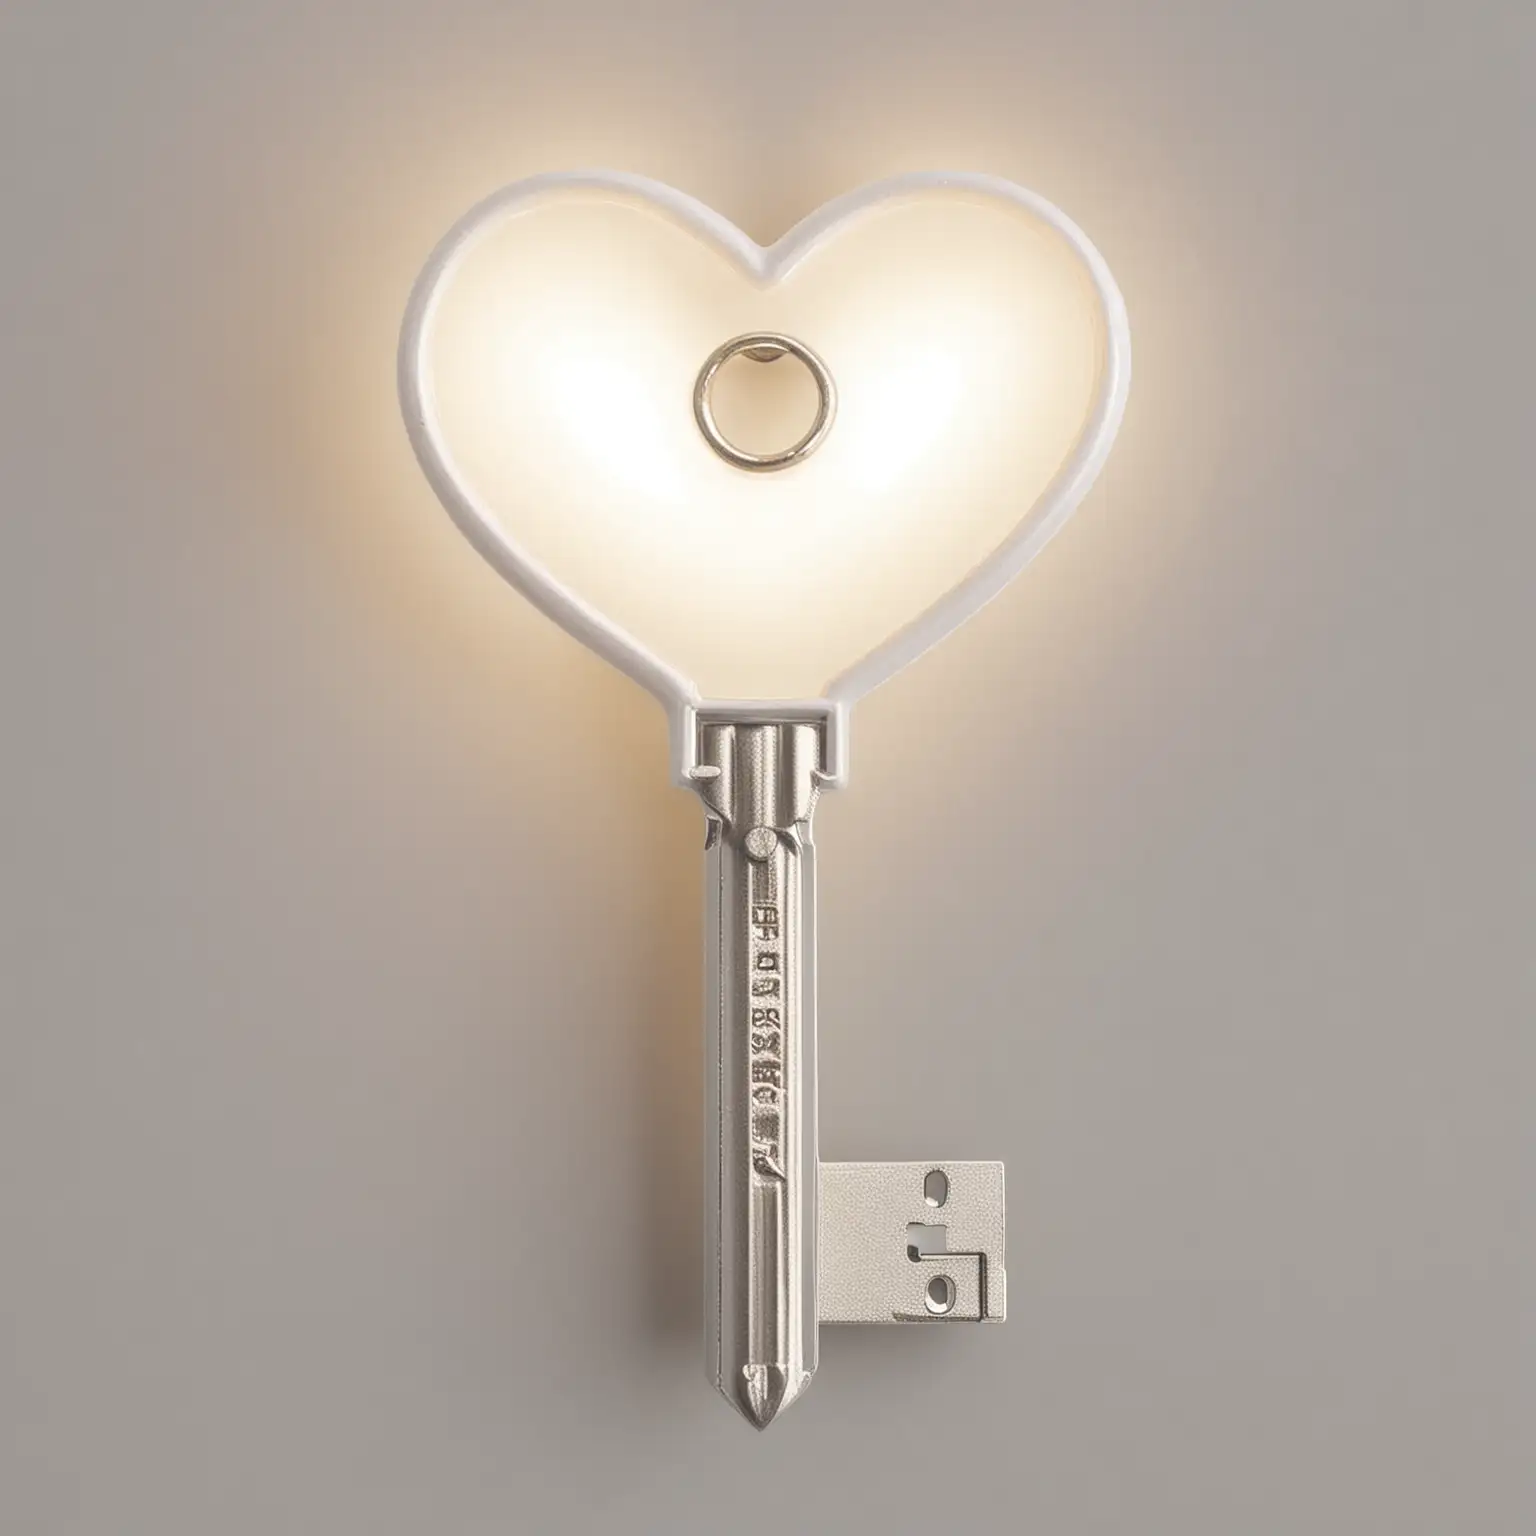 a glowing all white light classic key shining and the top is shaped like a hart